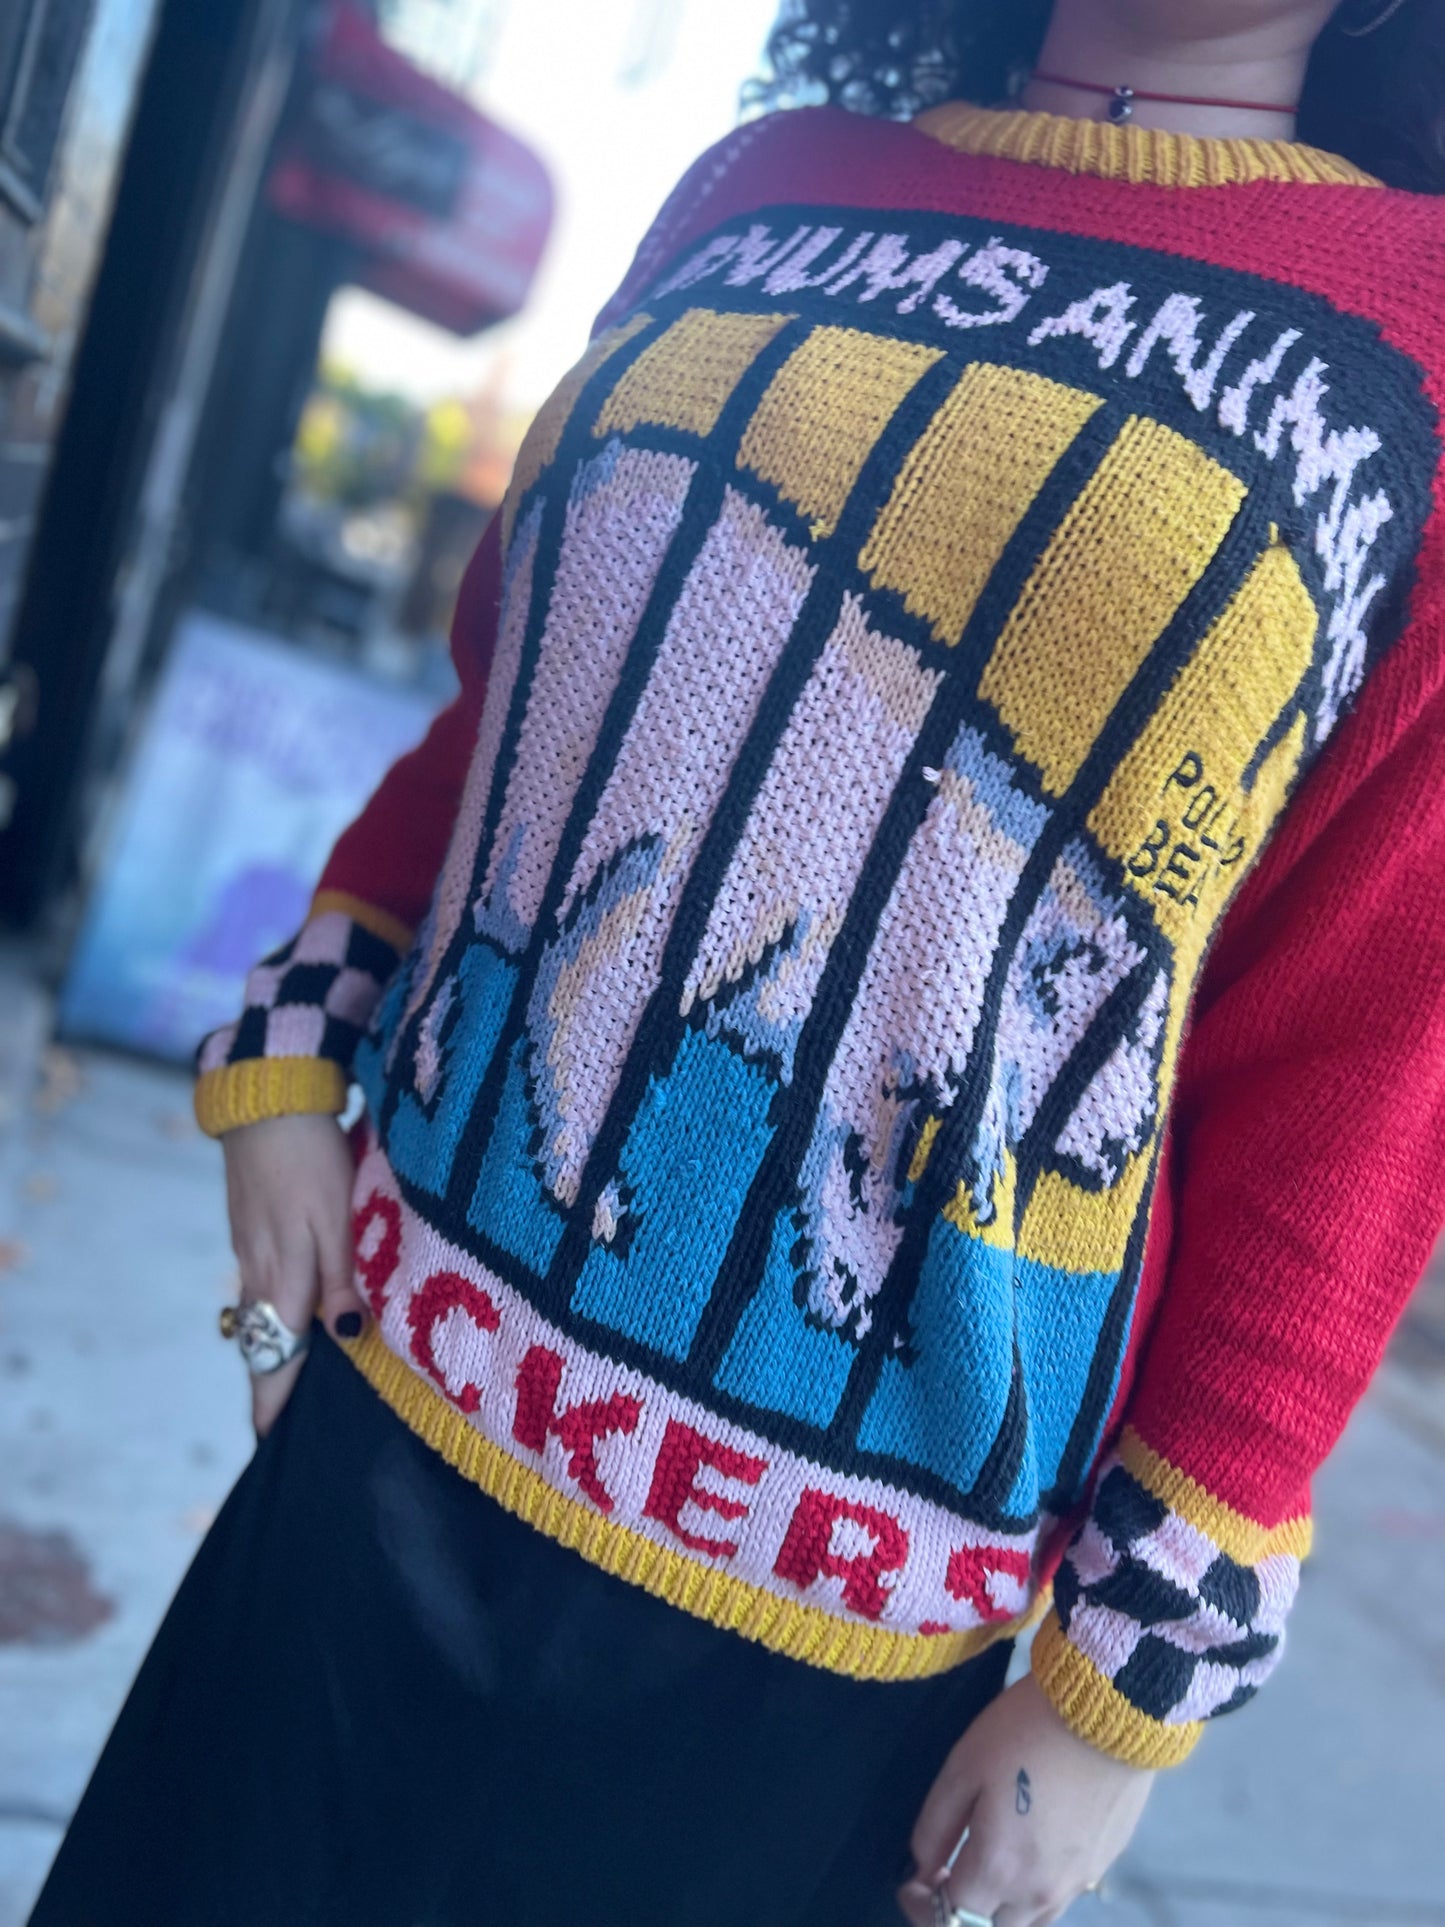 Vintage 90s Animal Crackers Sweater - Spark Pretty